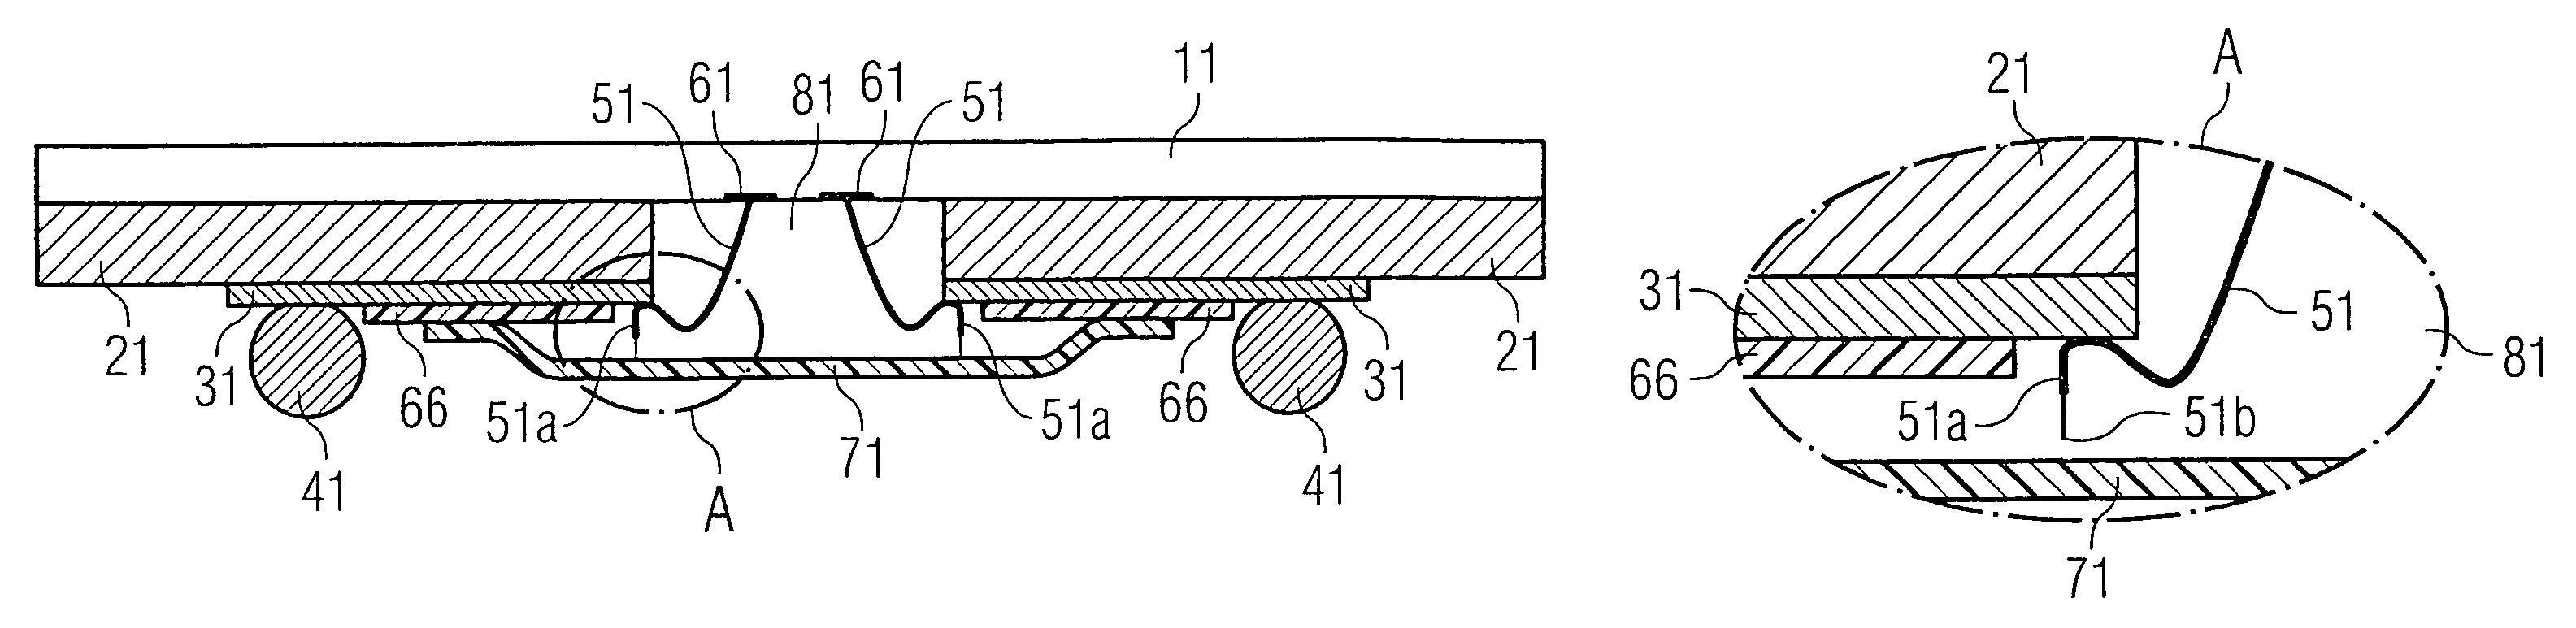 ESD protection apparatus for an electrical device